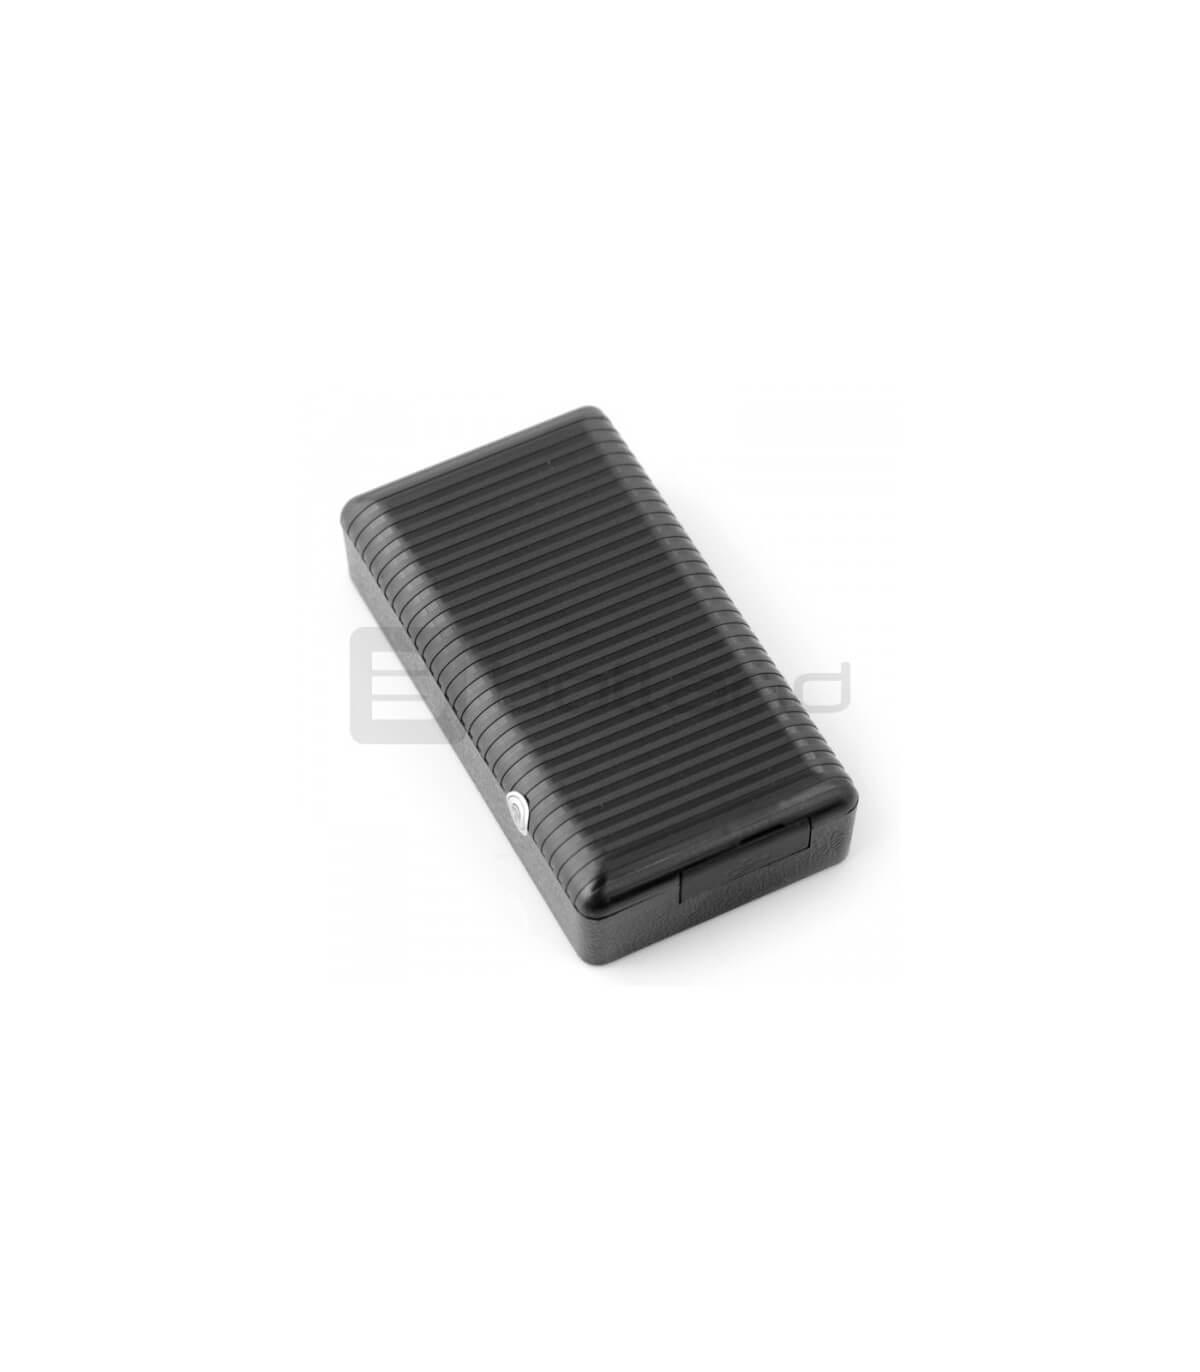 Auto GPS Tracker Blow BL003 - GPS / GSM Autoortung - Magnet